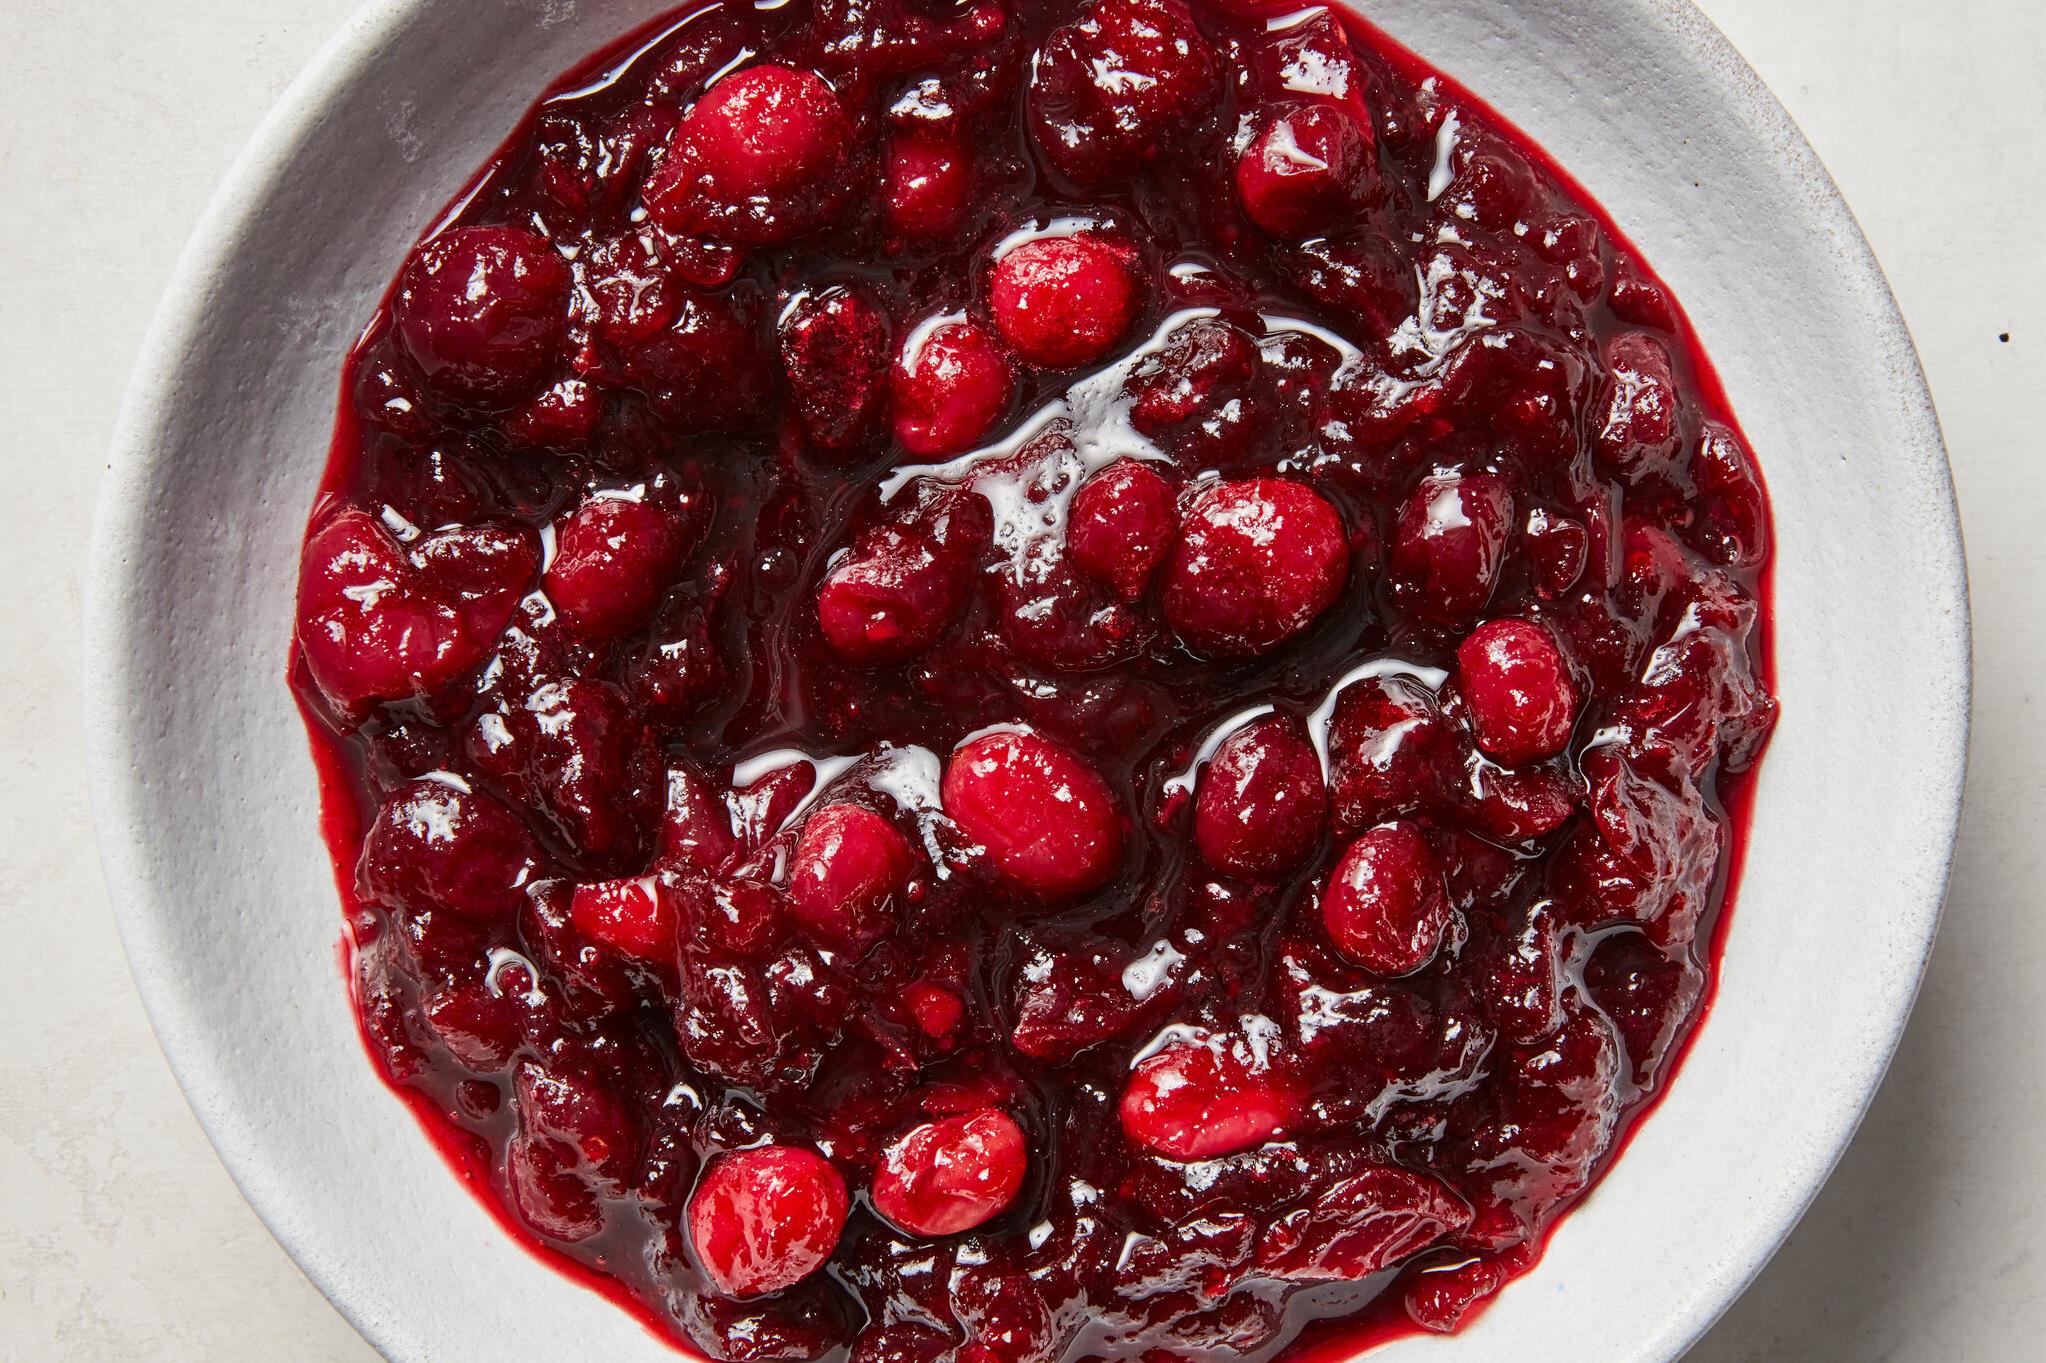  A bold twist on a classic: cranberry sauce with a splash of red wine